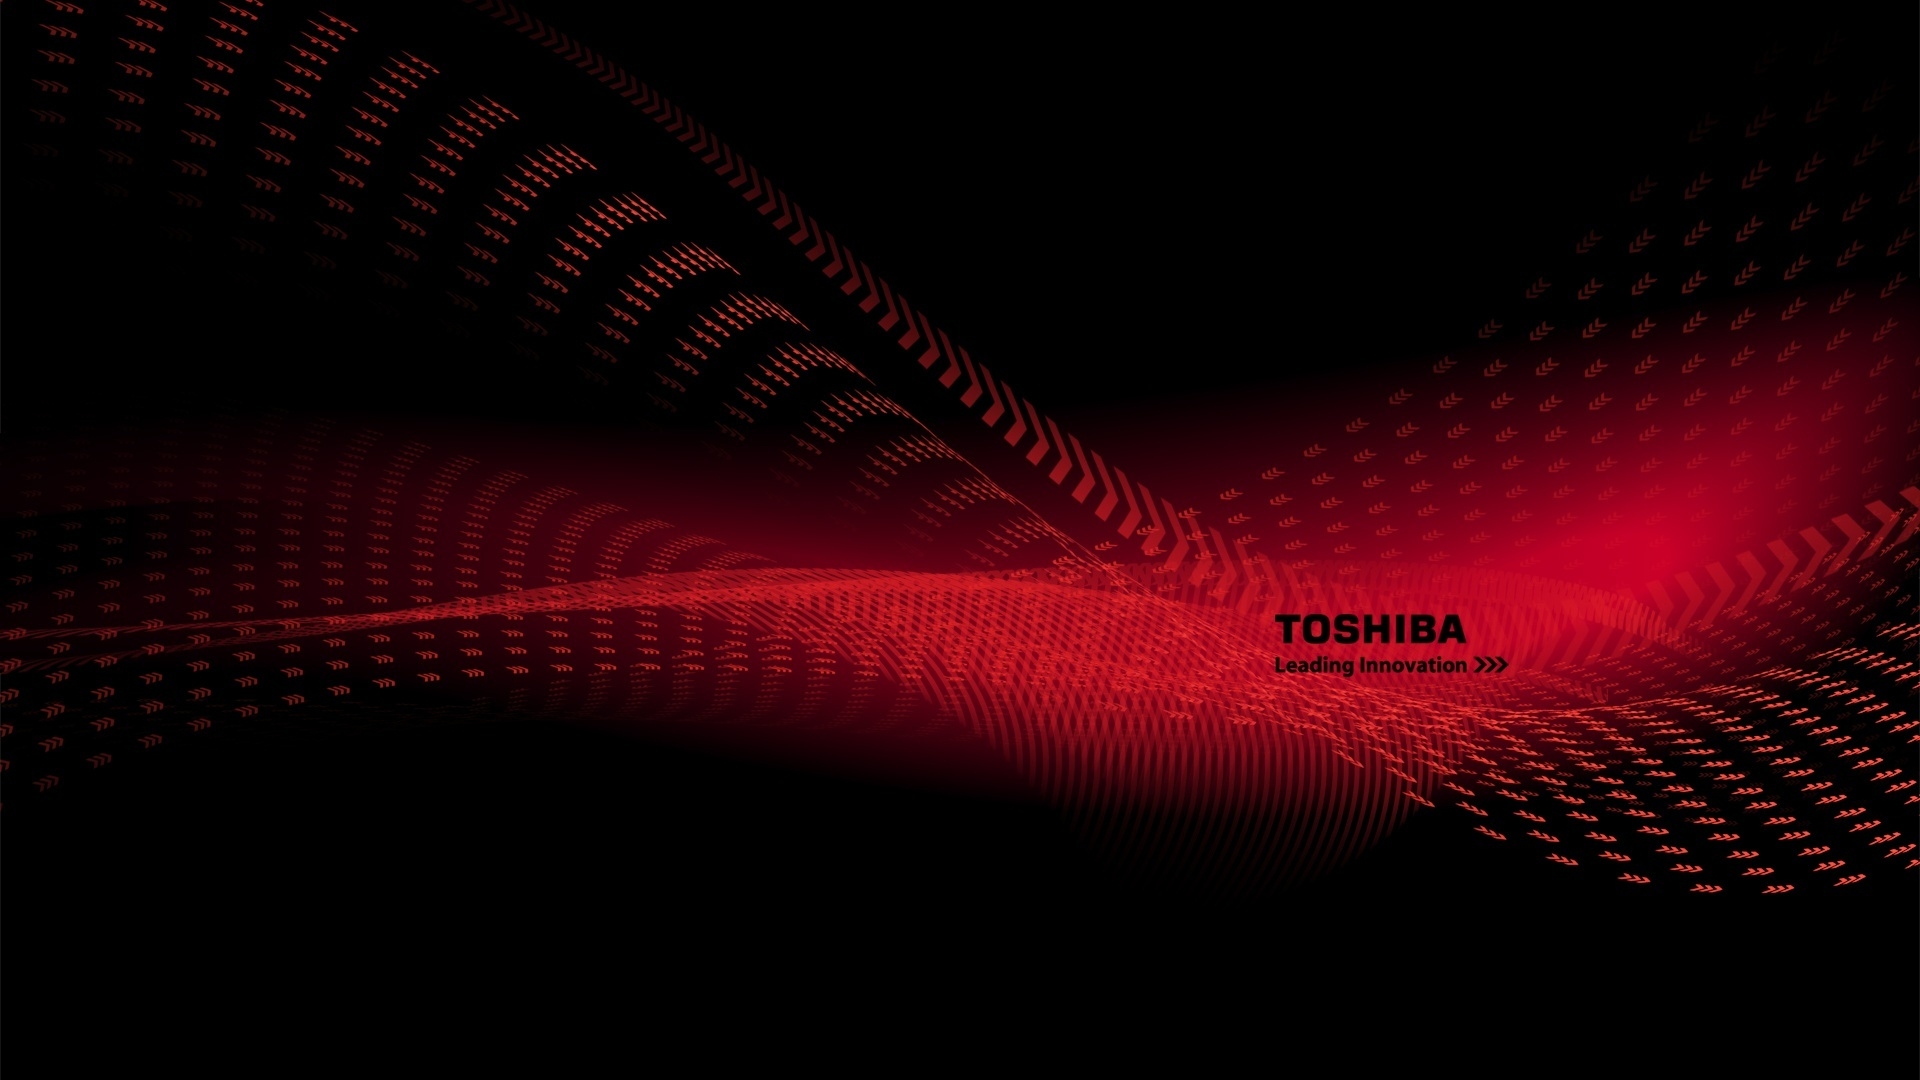 Toshiba red wave wallpaper | brands and logos | WallpaperPCMobile